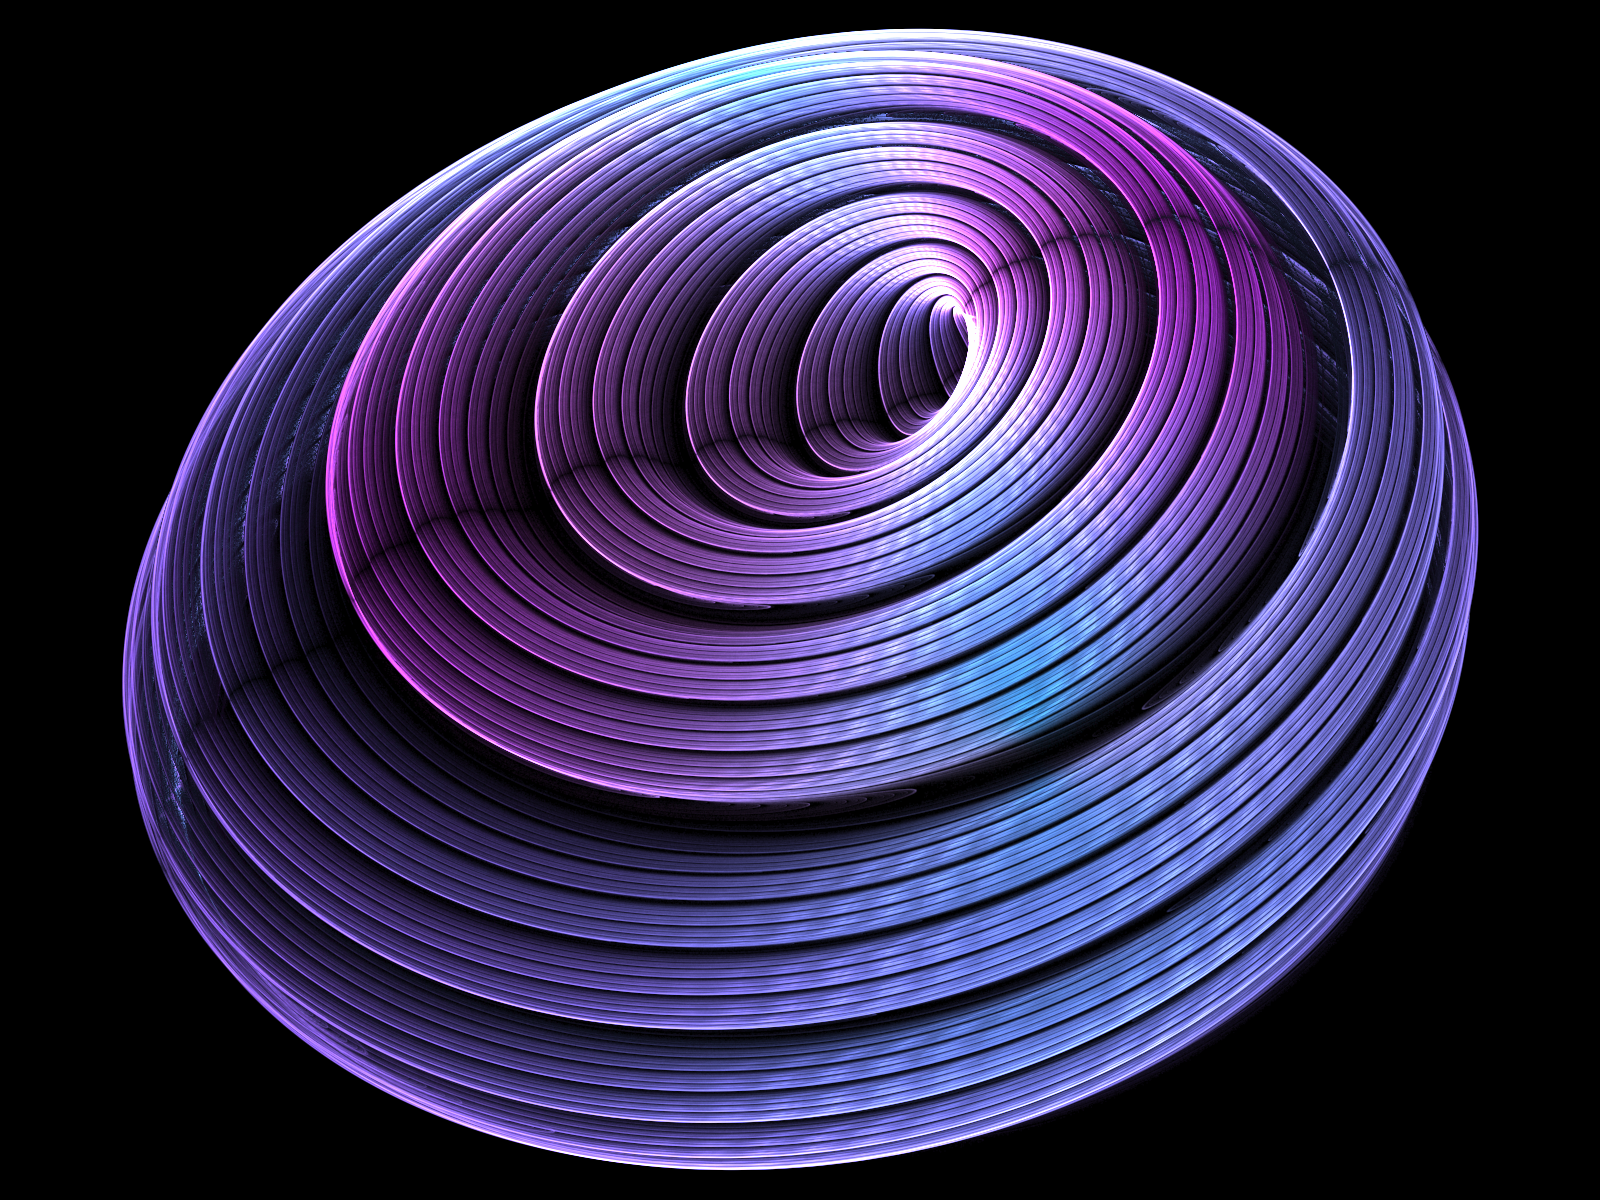 Circle Swirl Shapes Wallpapers